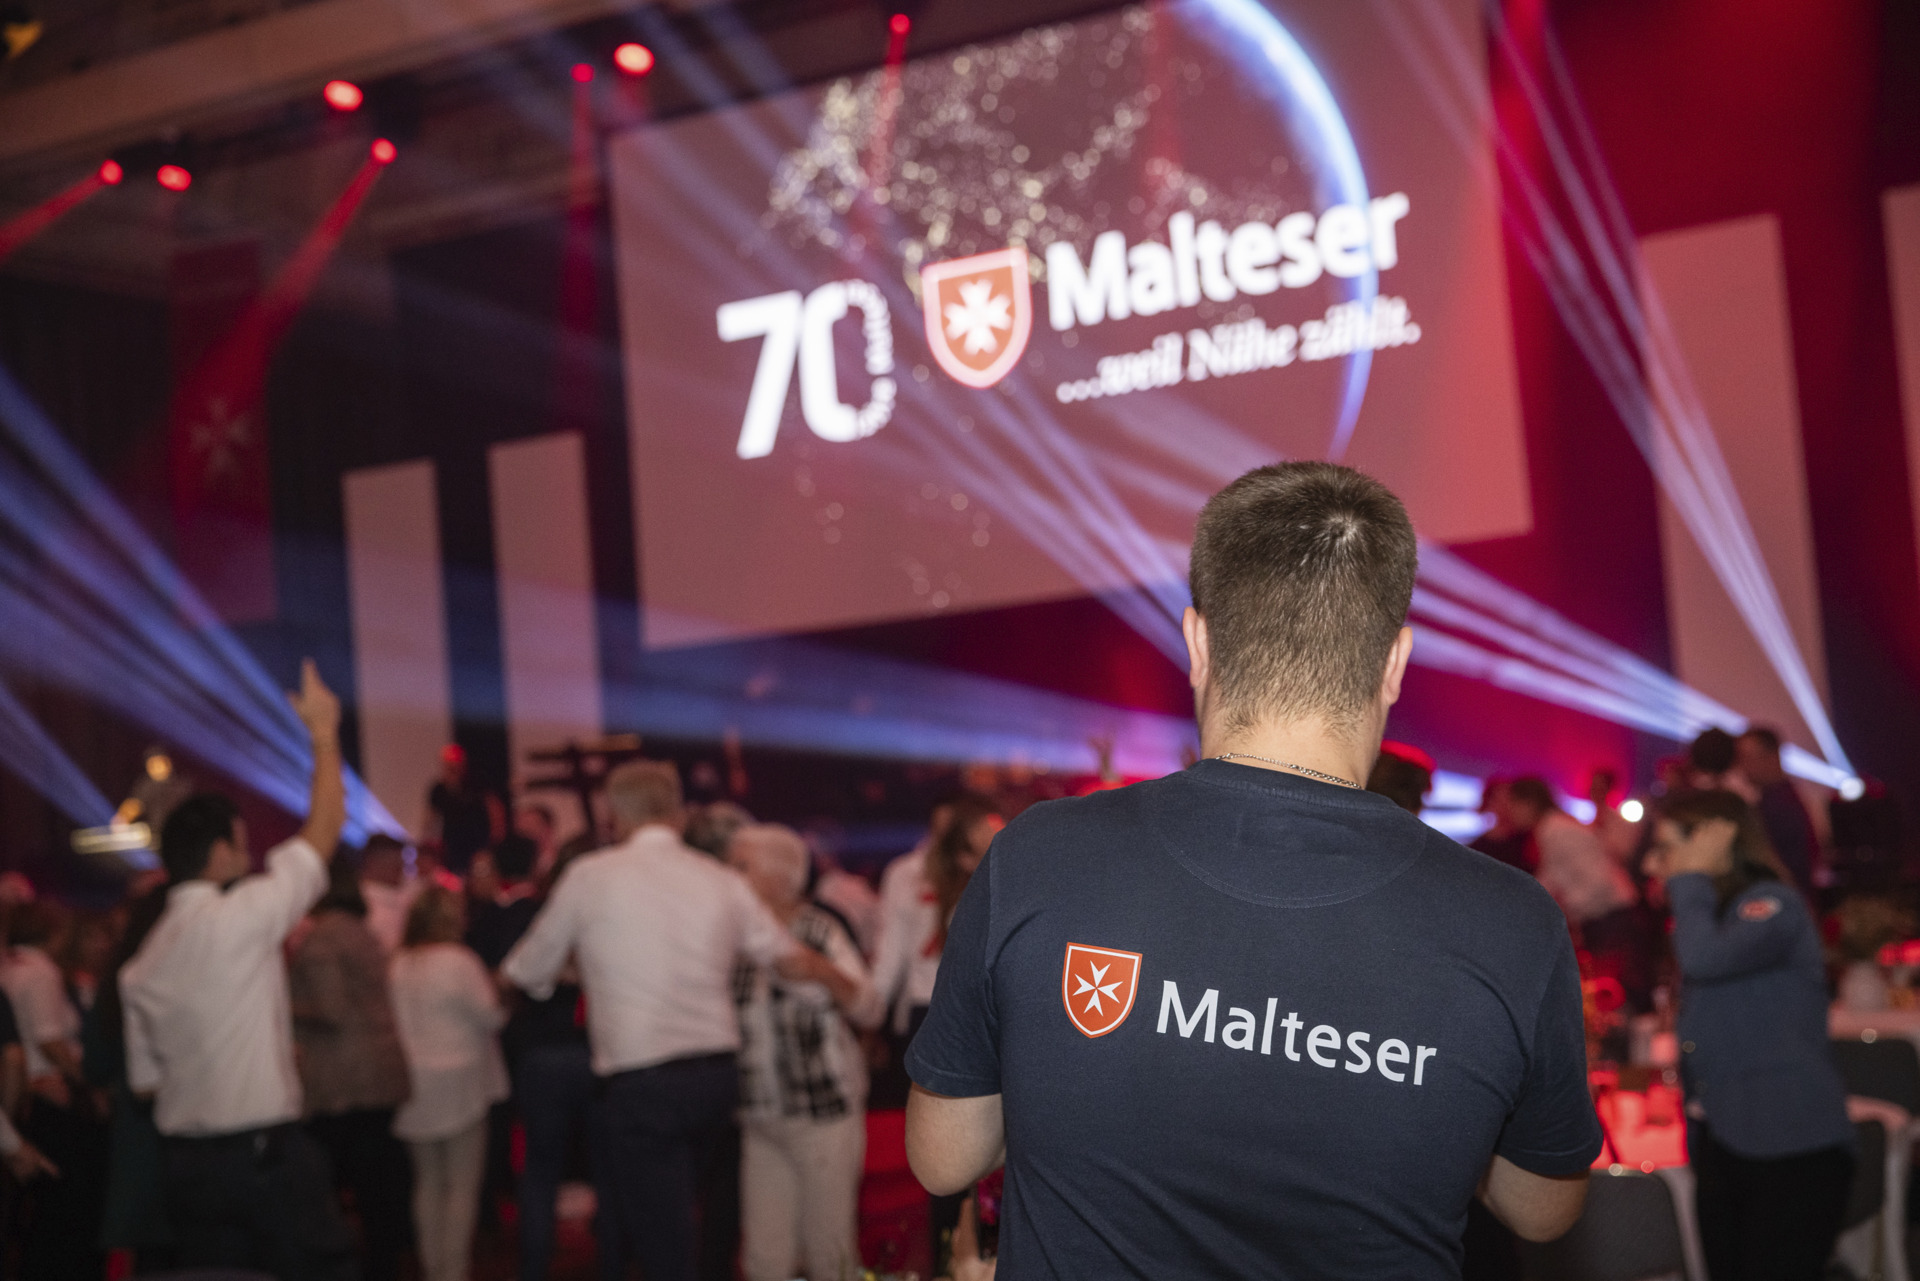 Order of Malta Relief Corps in Germany celebrates its 70th anniversary